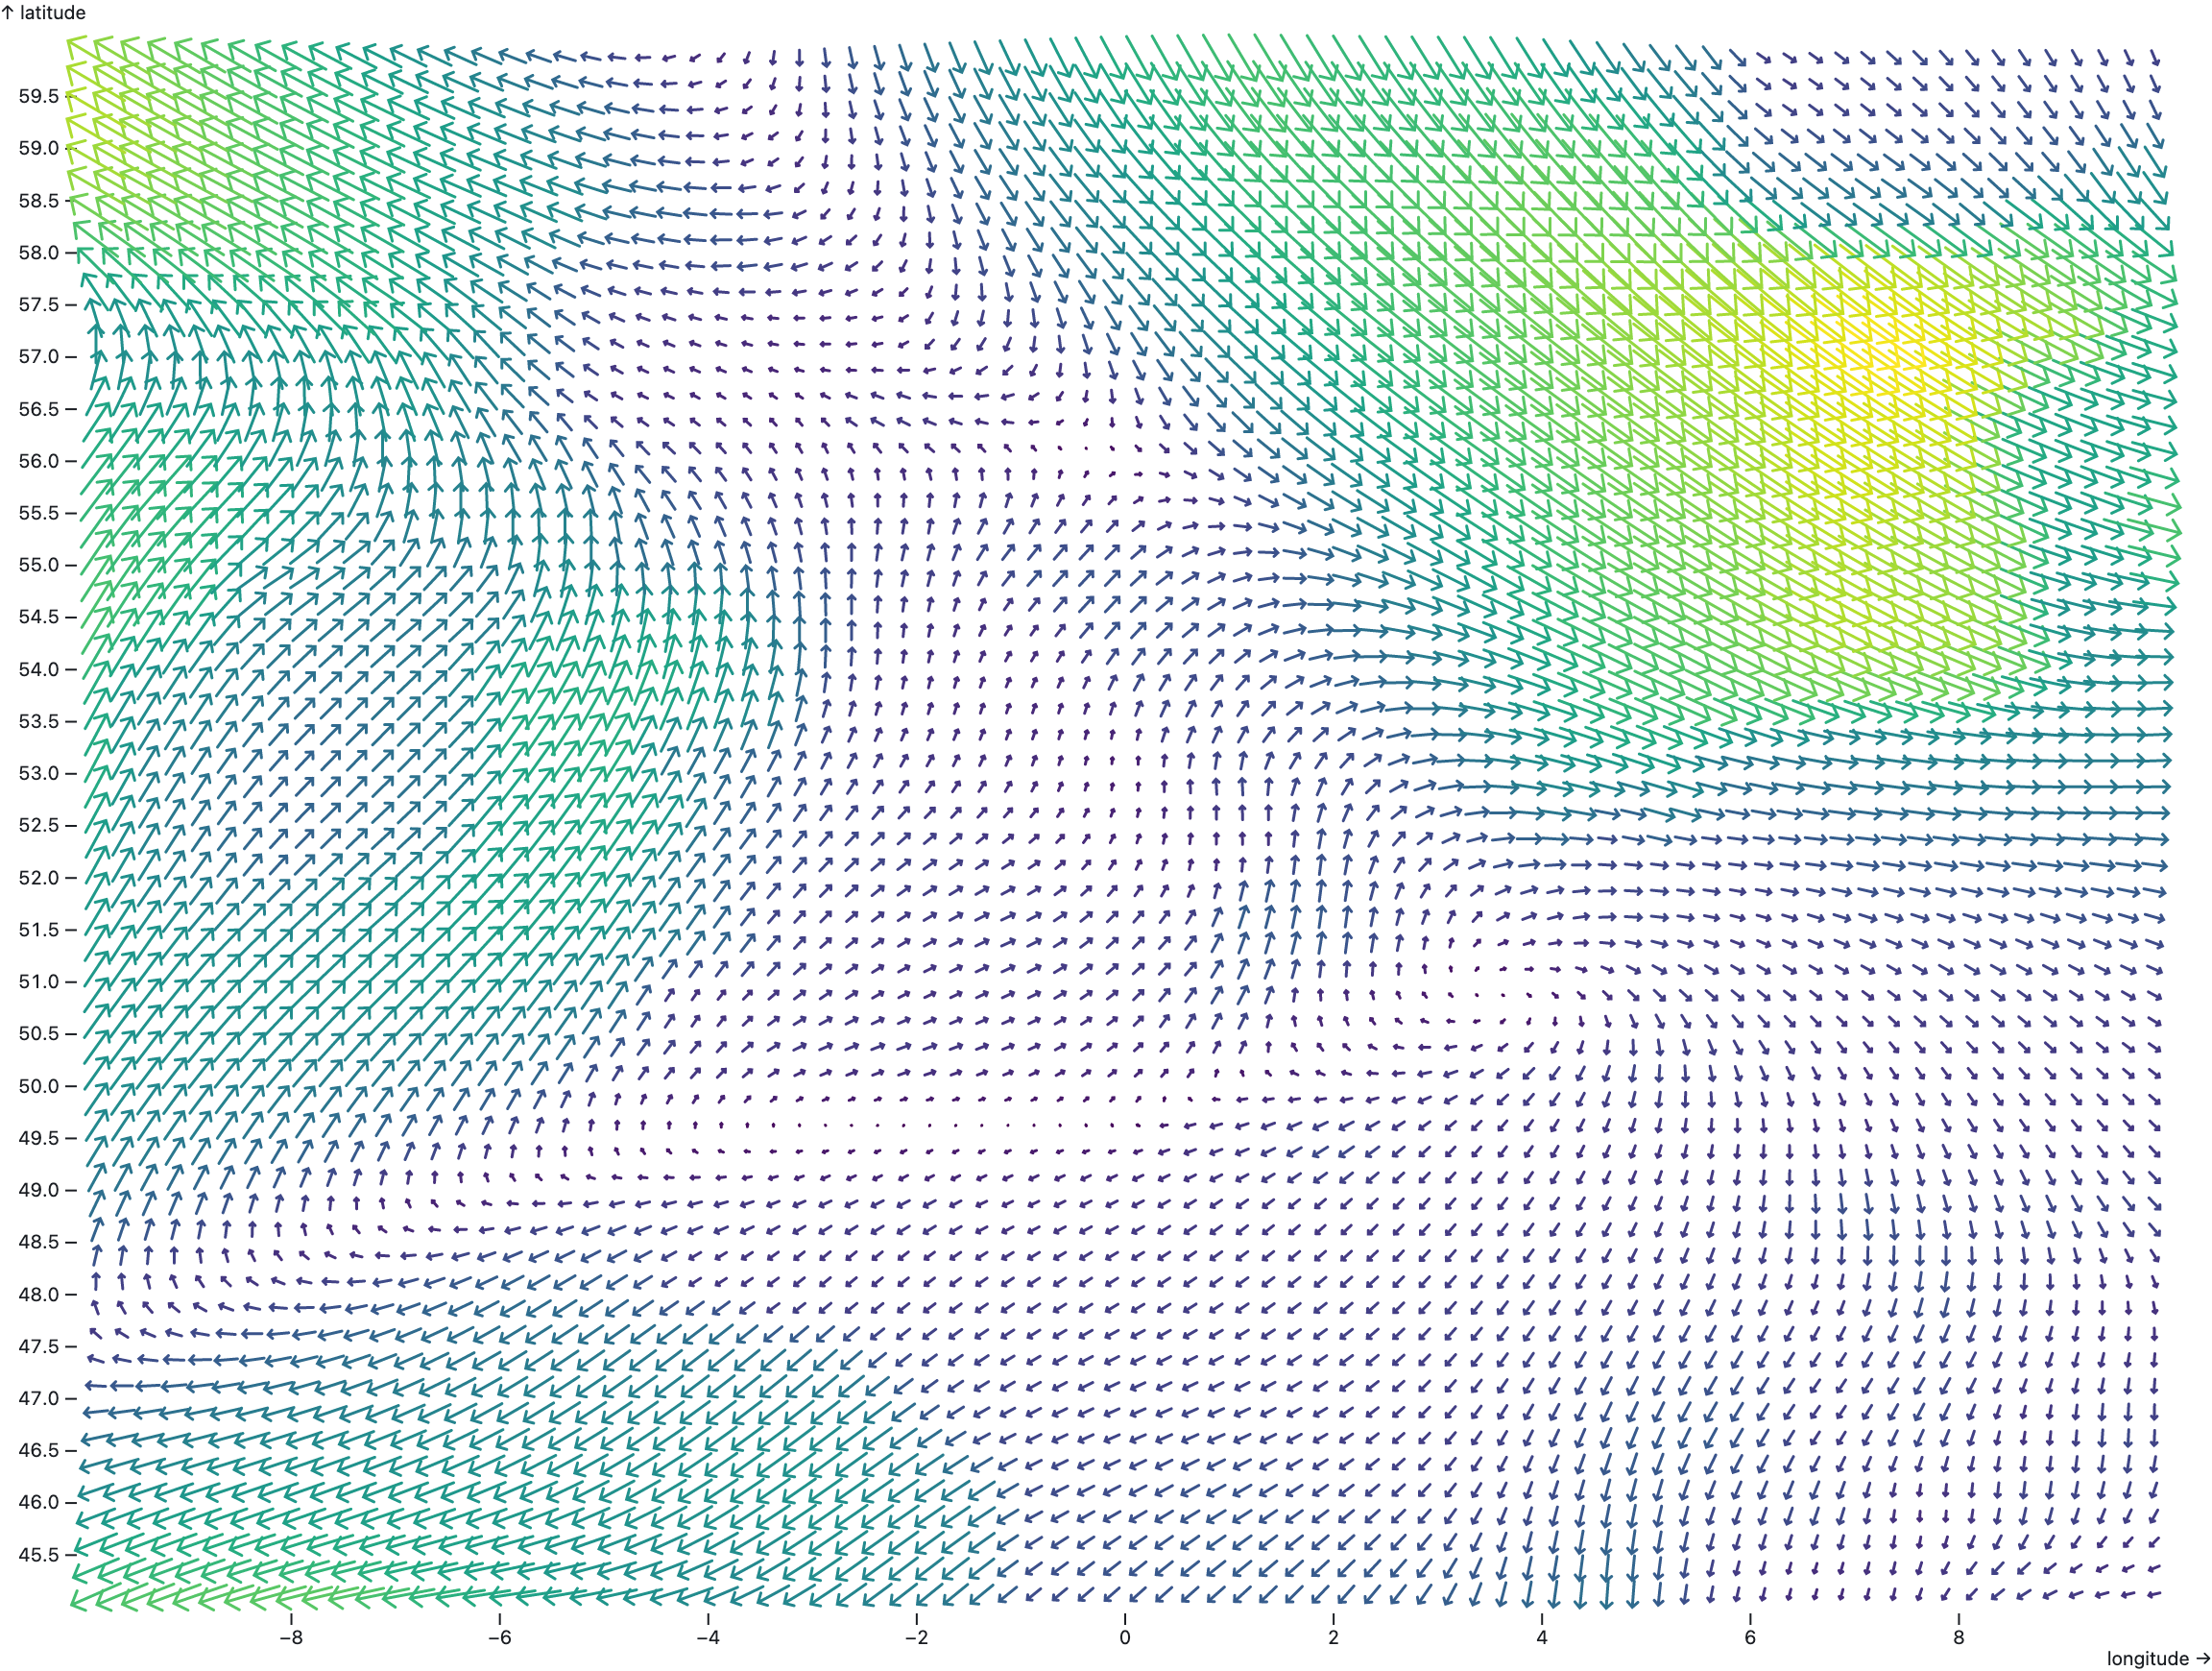 Colored and scaled arrows arranged on a grid with latitude on the y axis and longitude on the x axis